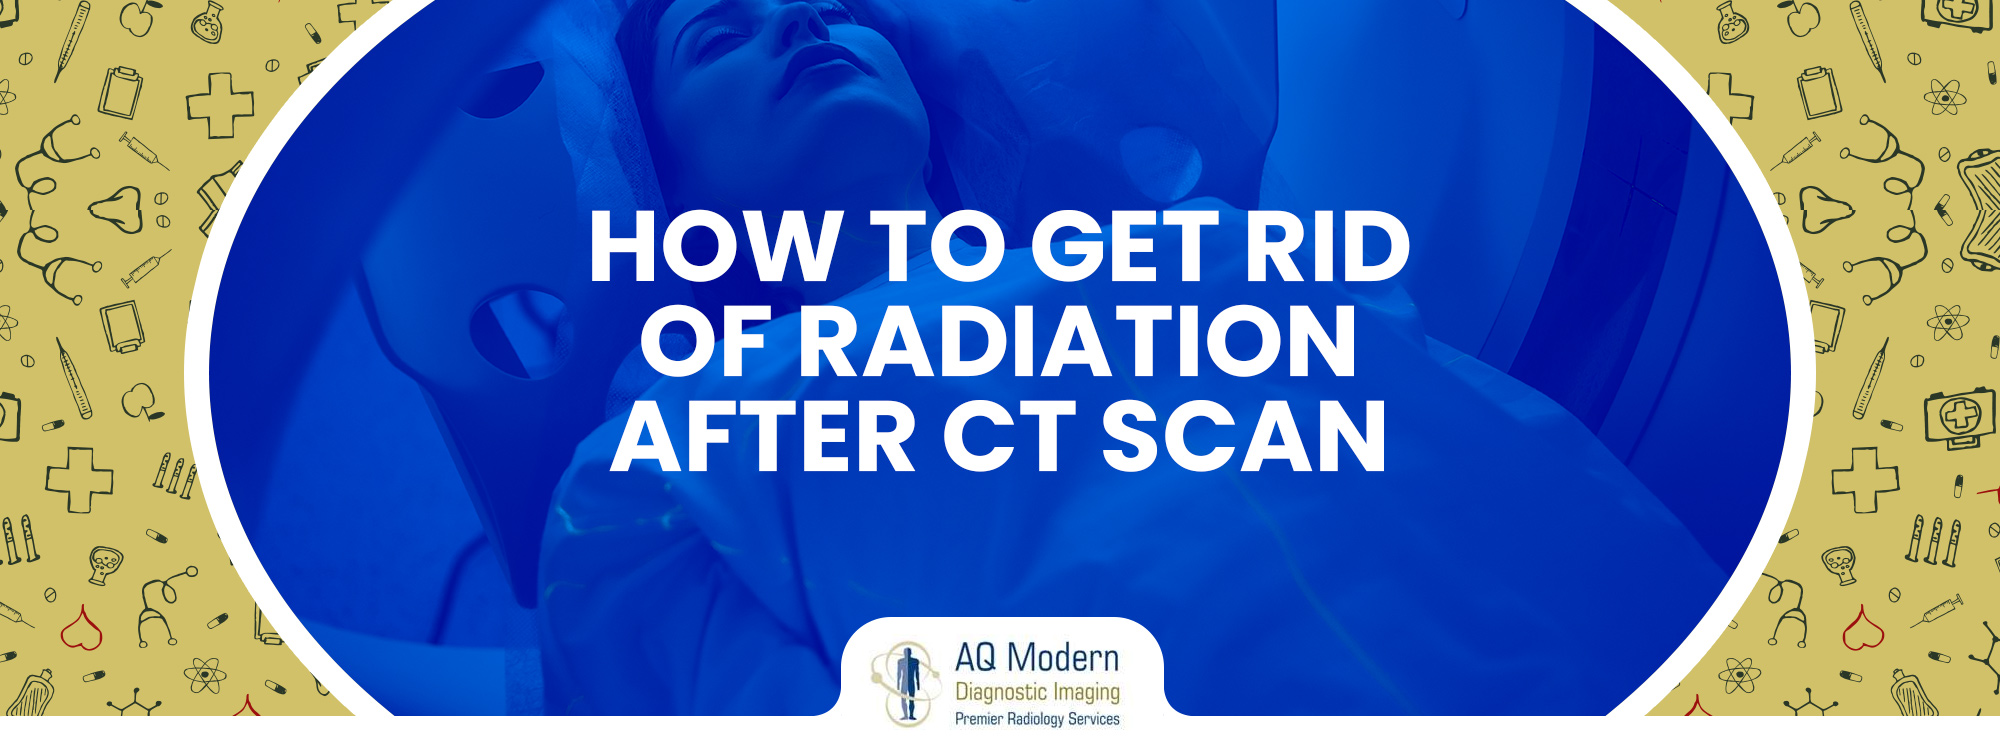 How To Get Rid Of Radiation After CT Scan